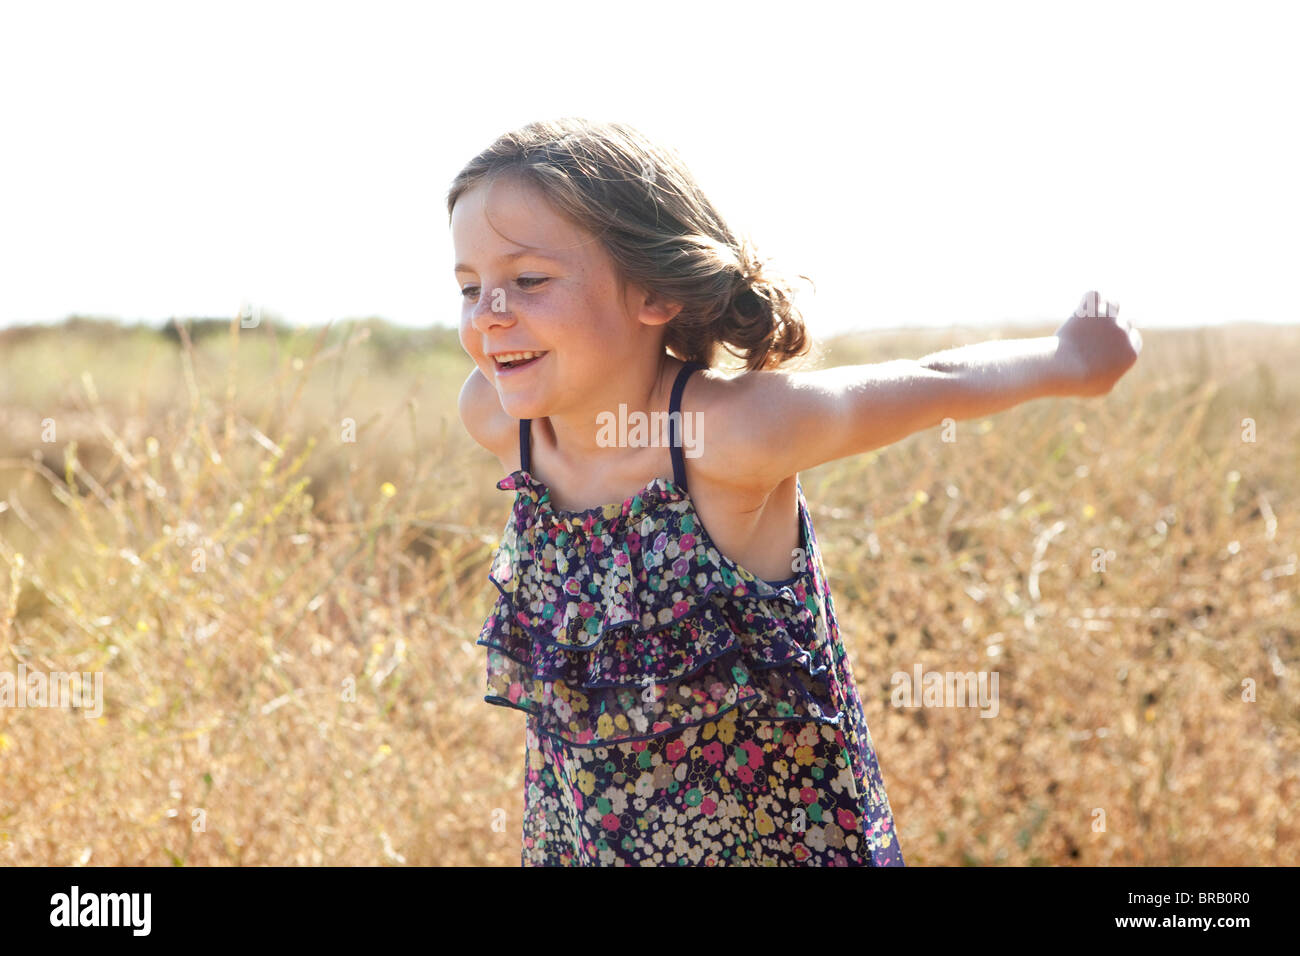 Little girl playing in a field Stock Photo